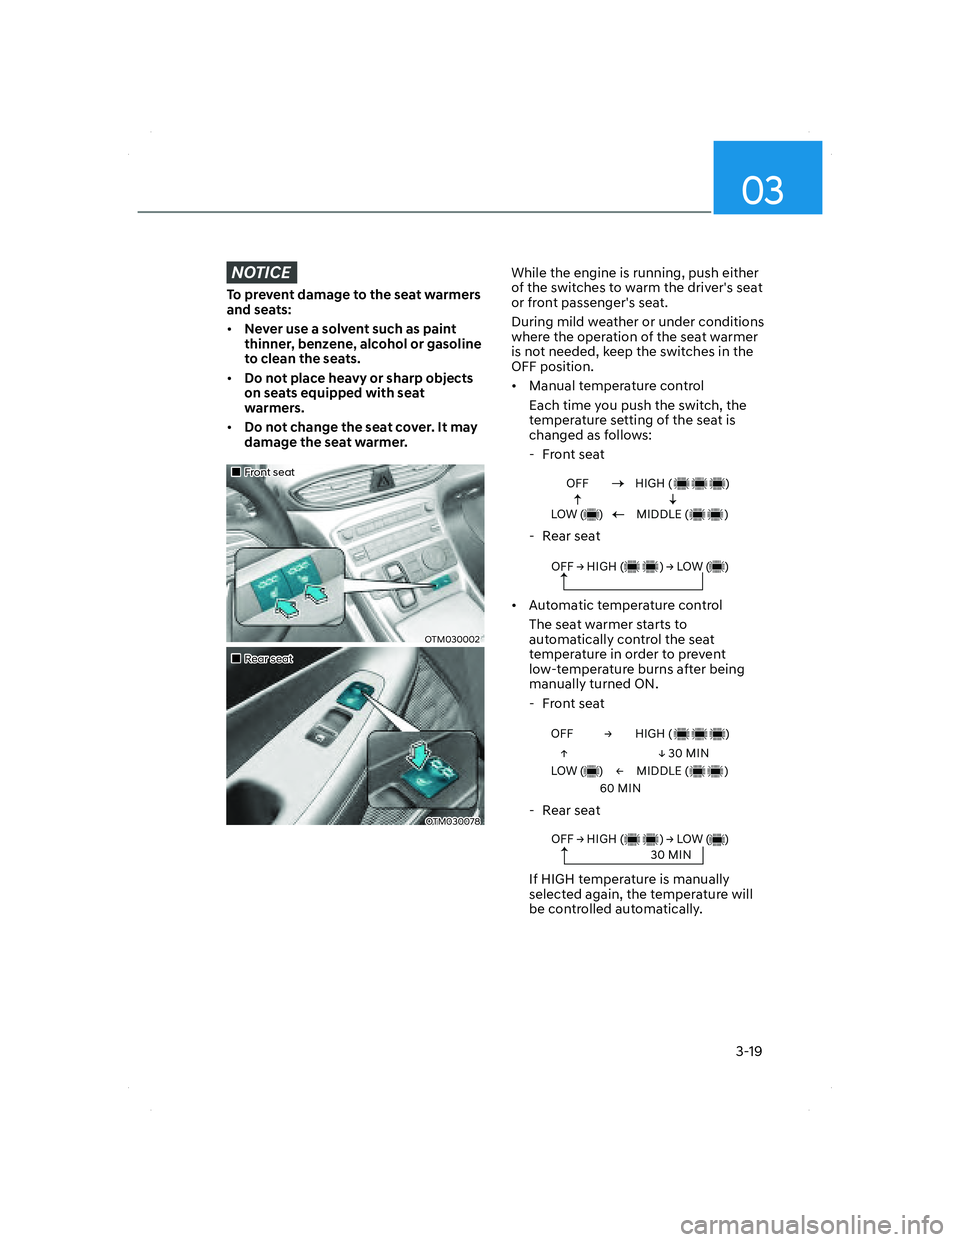 HYUNDAI SANTA FE 2022 Service Manual 03
3-19
NOTICE
To prevent damage to the seat warmers 
and seats:
• Never use a solvent such as paint 
thinner, benzene, alcohol or gasoline 
to clean the seats.
• Do not place heavy or sharp objec